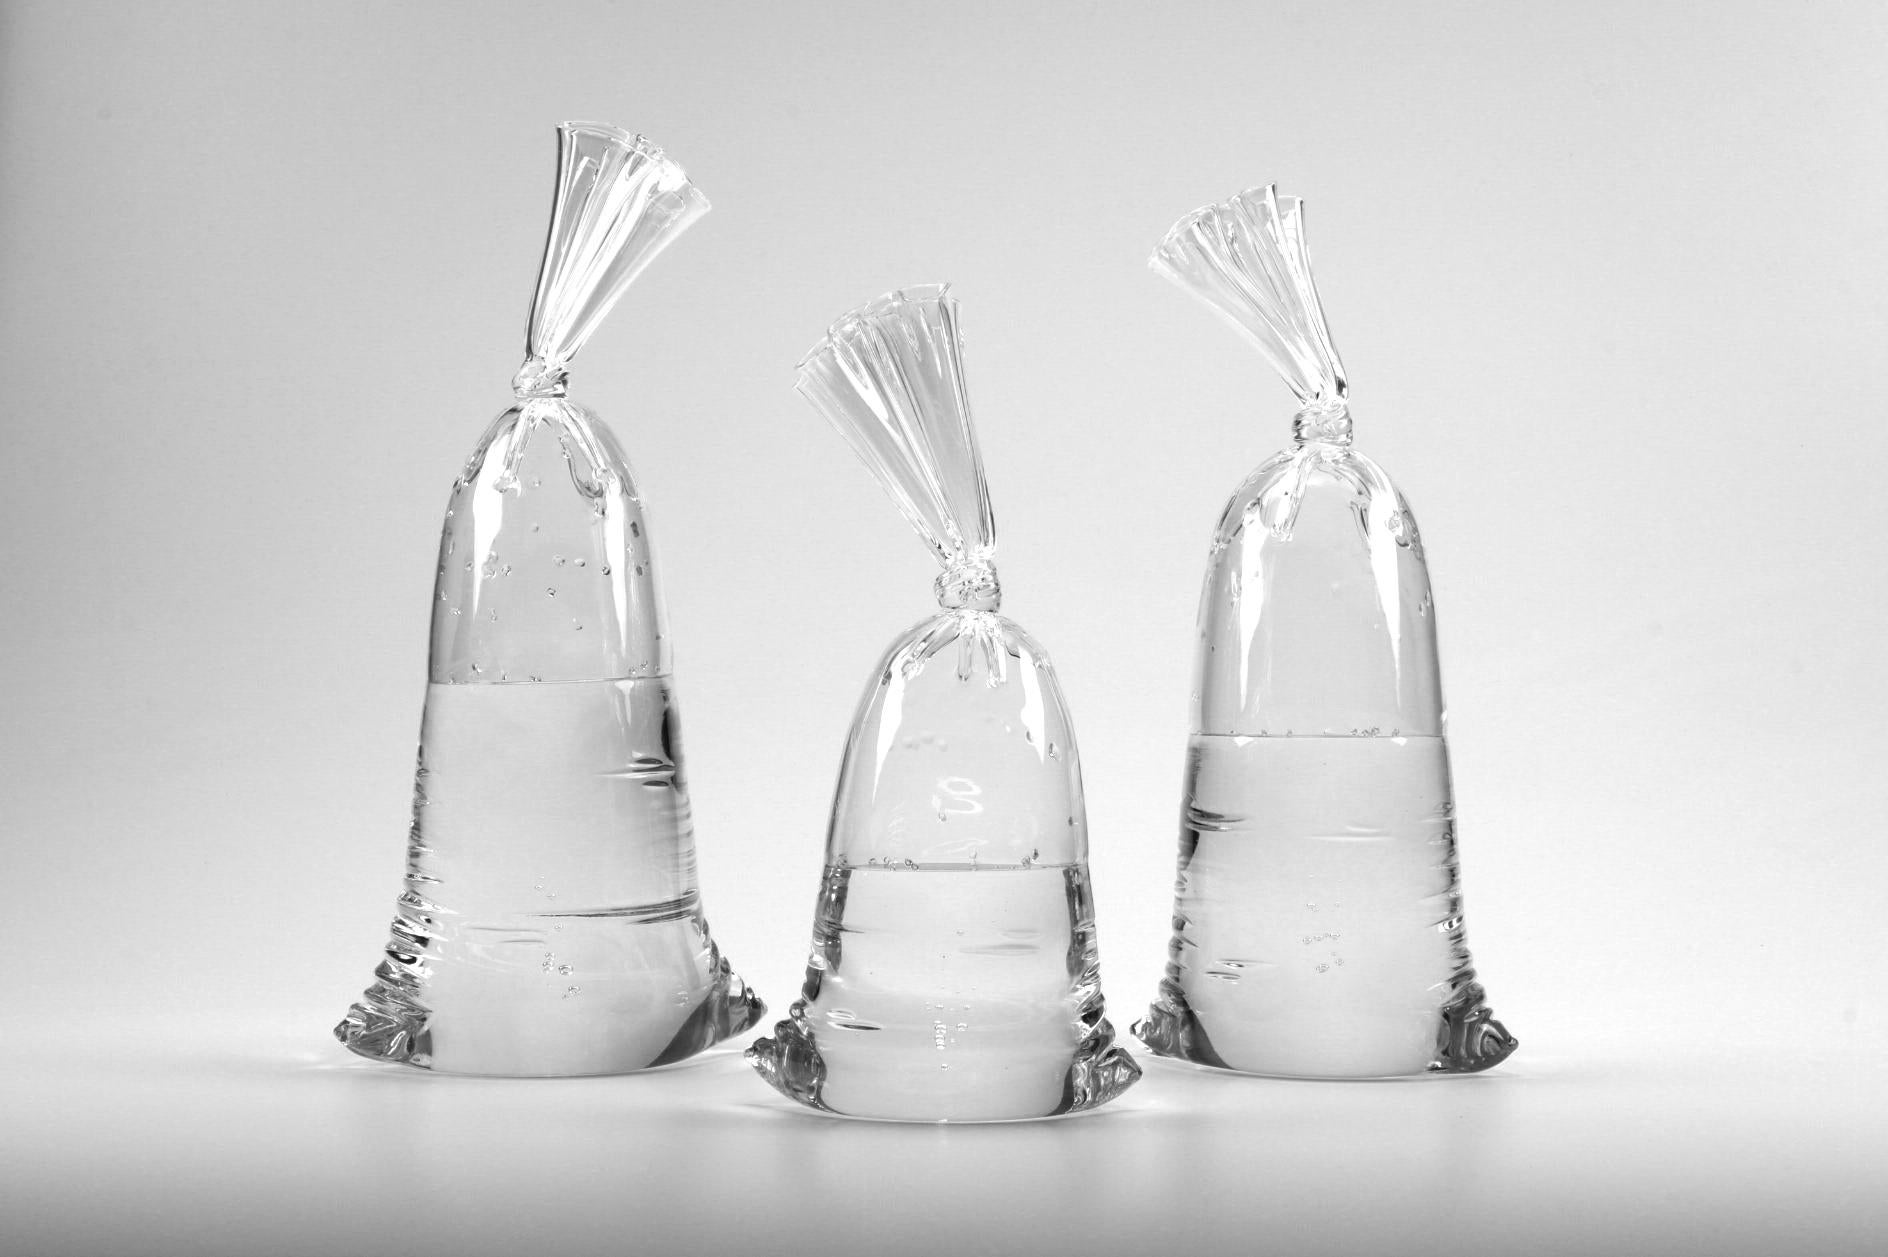 Small Glass Water Bag - Hyperreal glass sculpture - Sculpture by Dylan Martinez